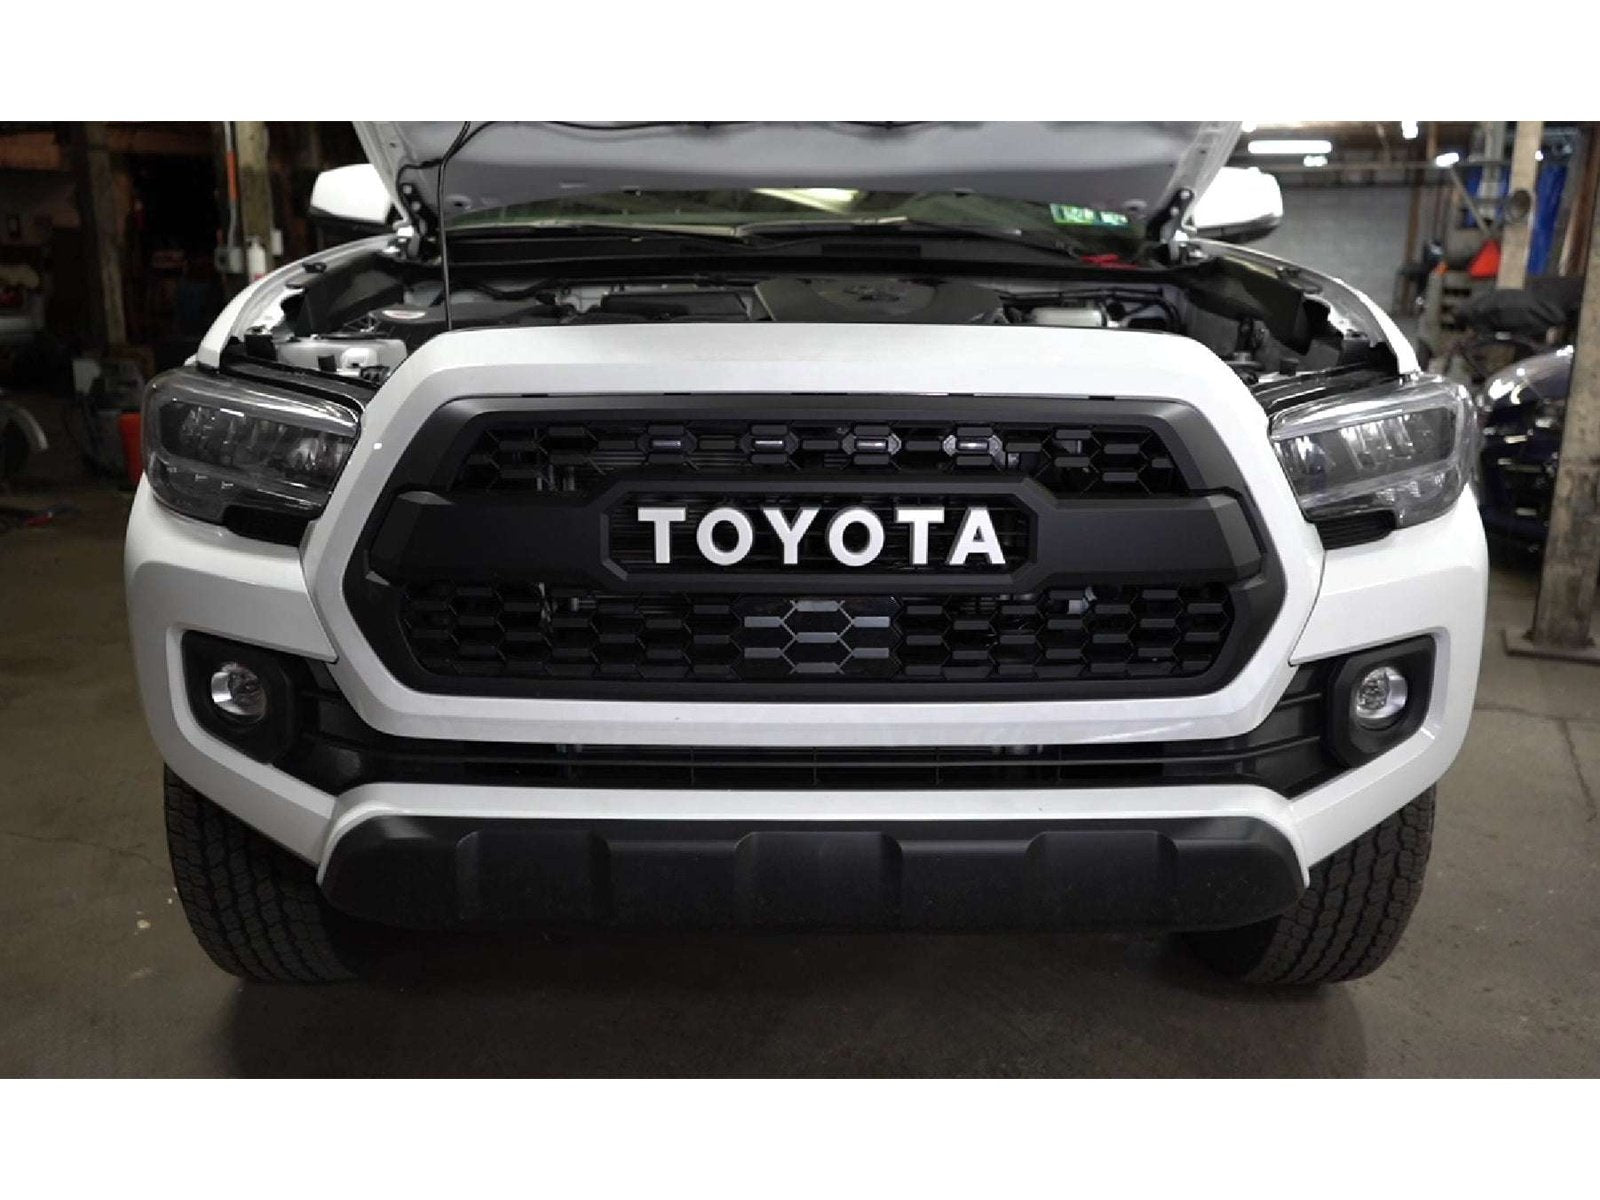 Where to buy OEM TRD Pro grill, Page 2